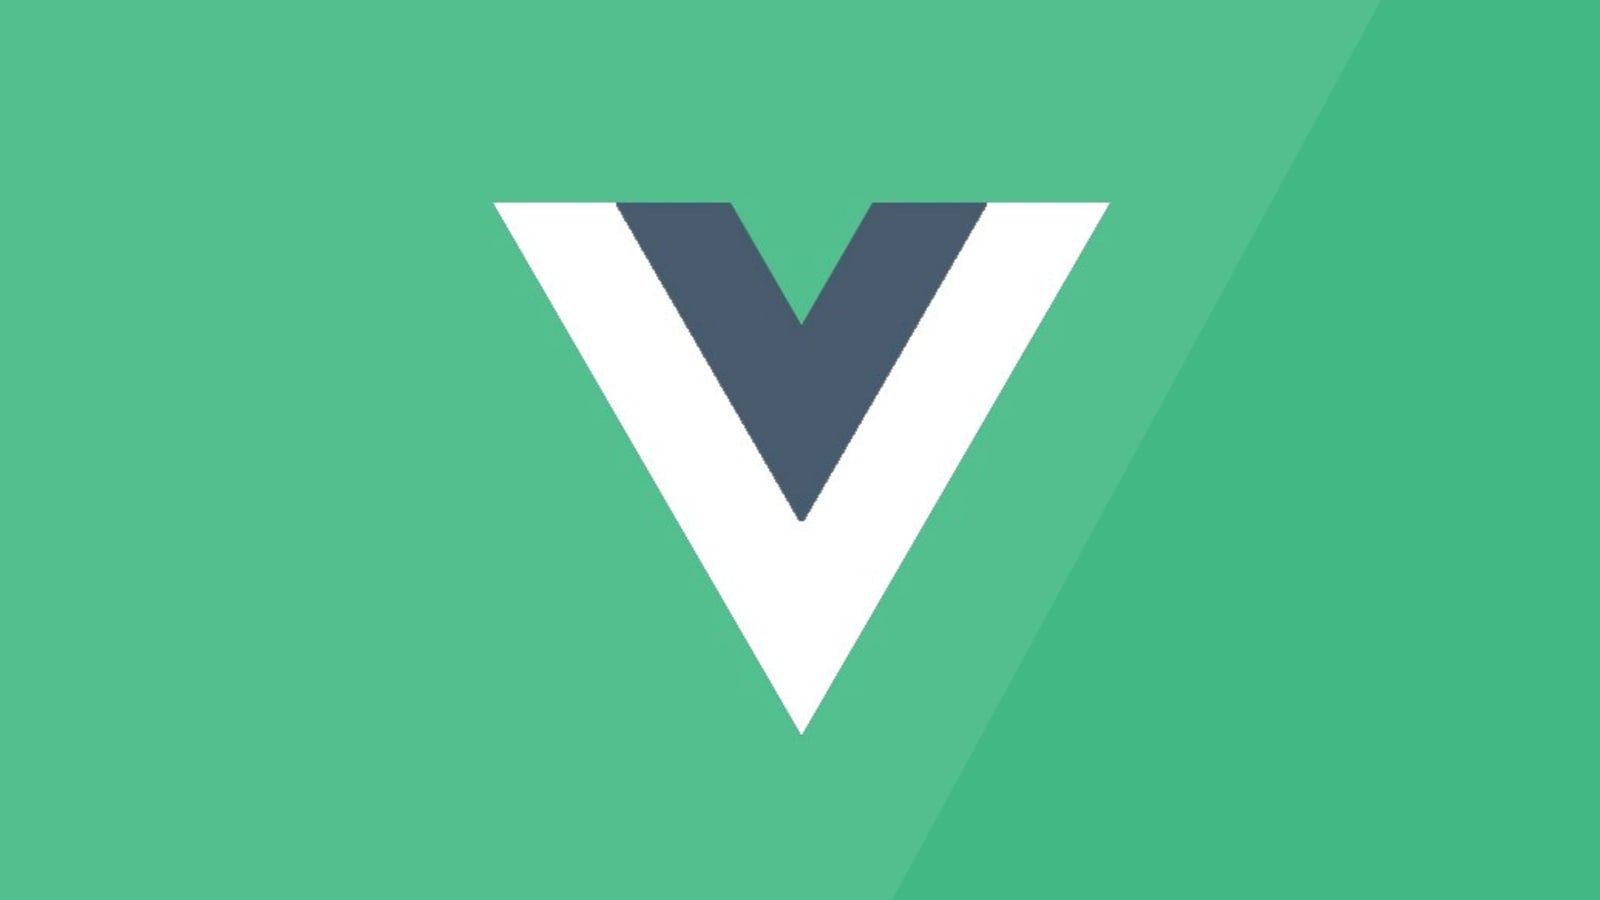 How to Check if Vue is in Development Mode?